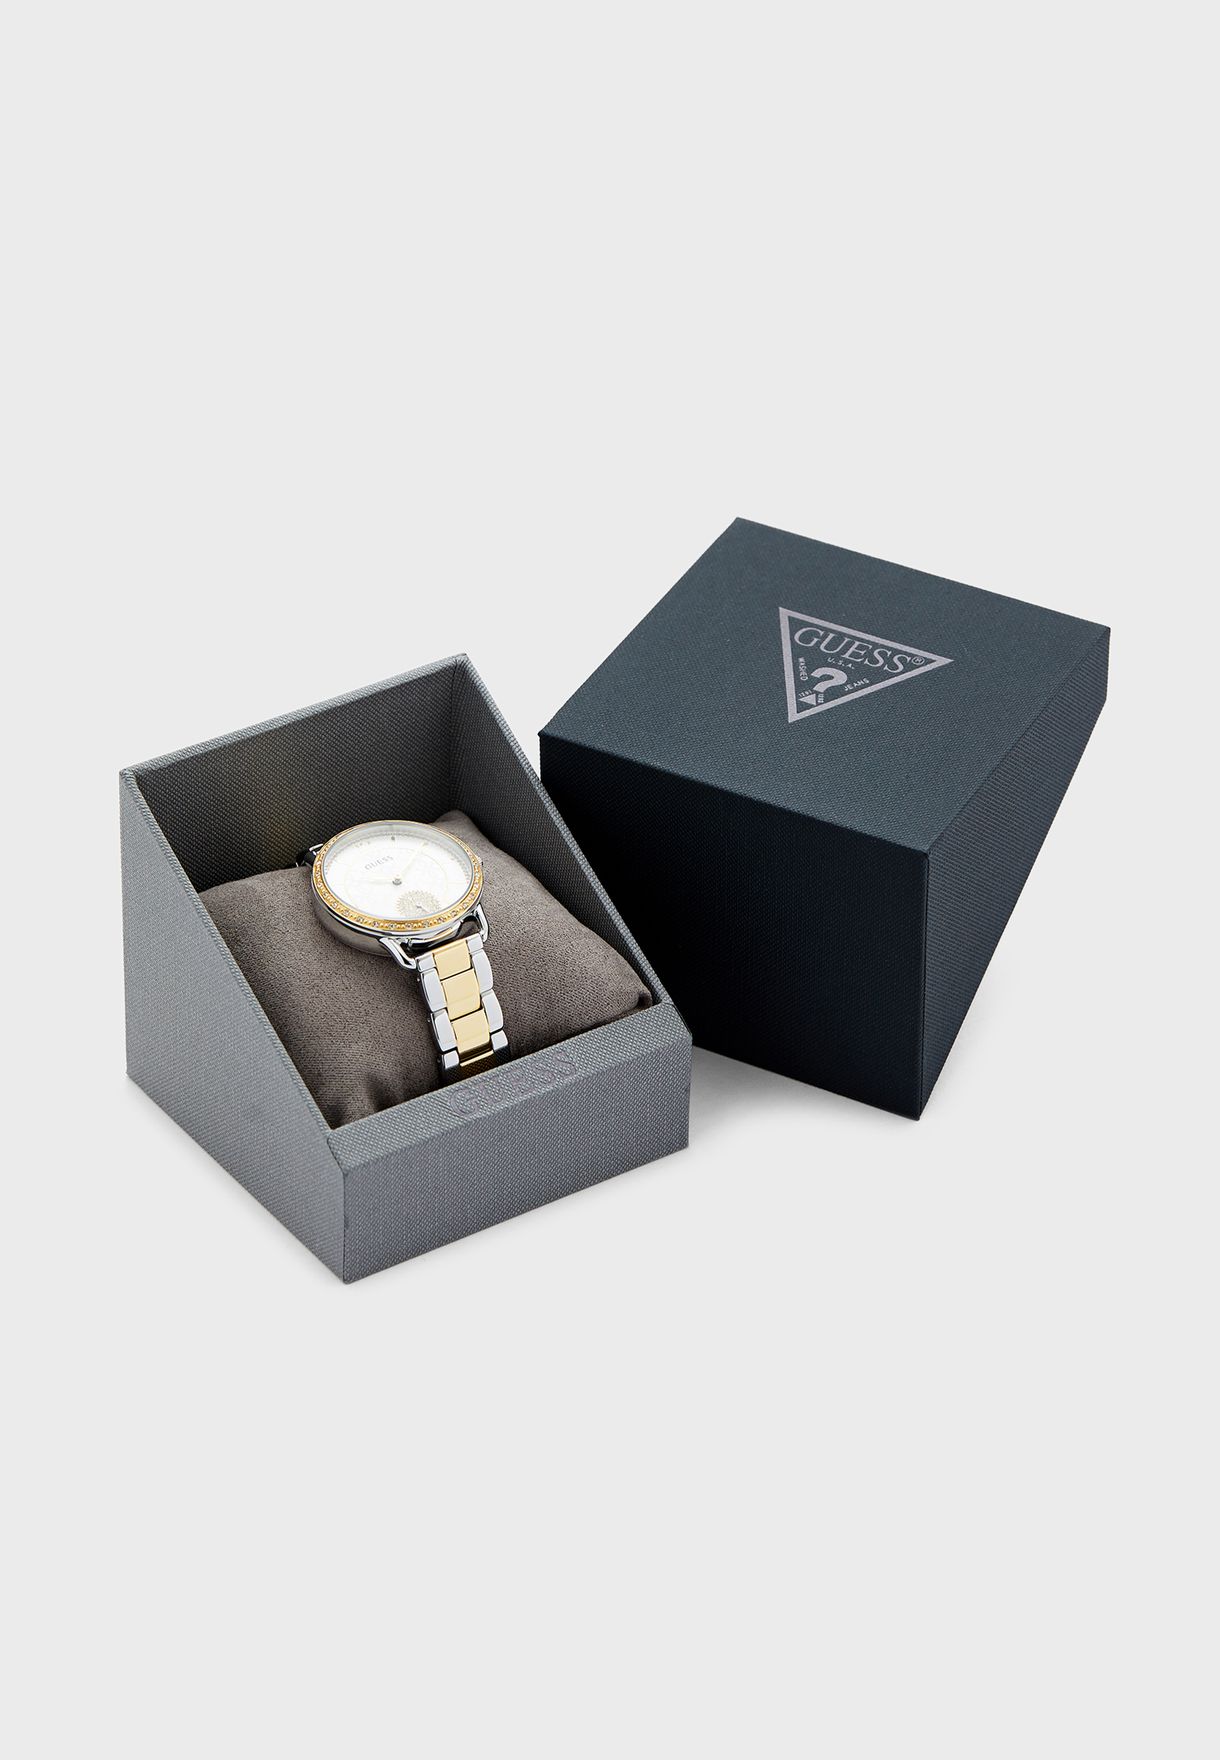 Astral Analog Watch